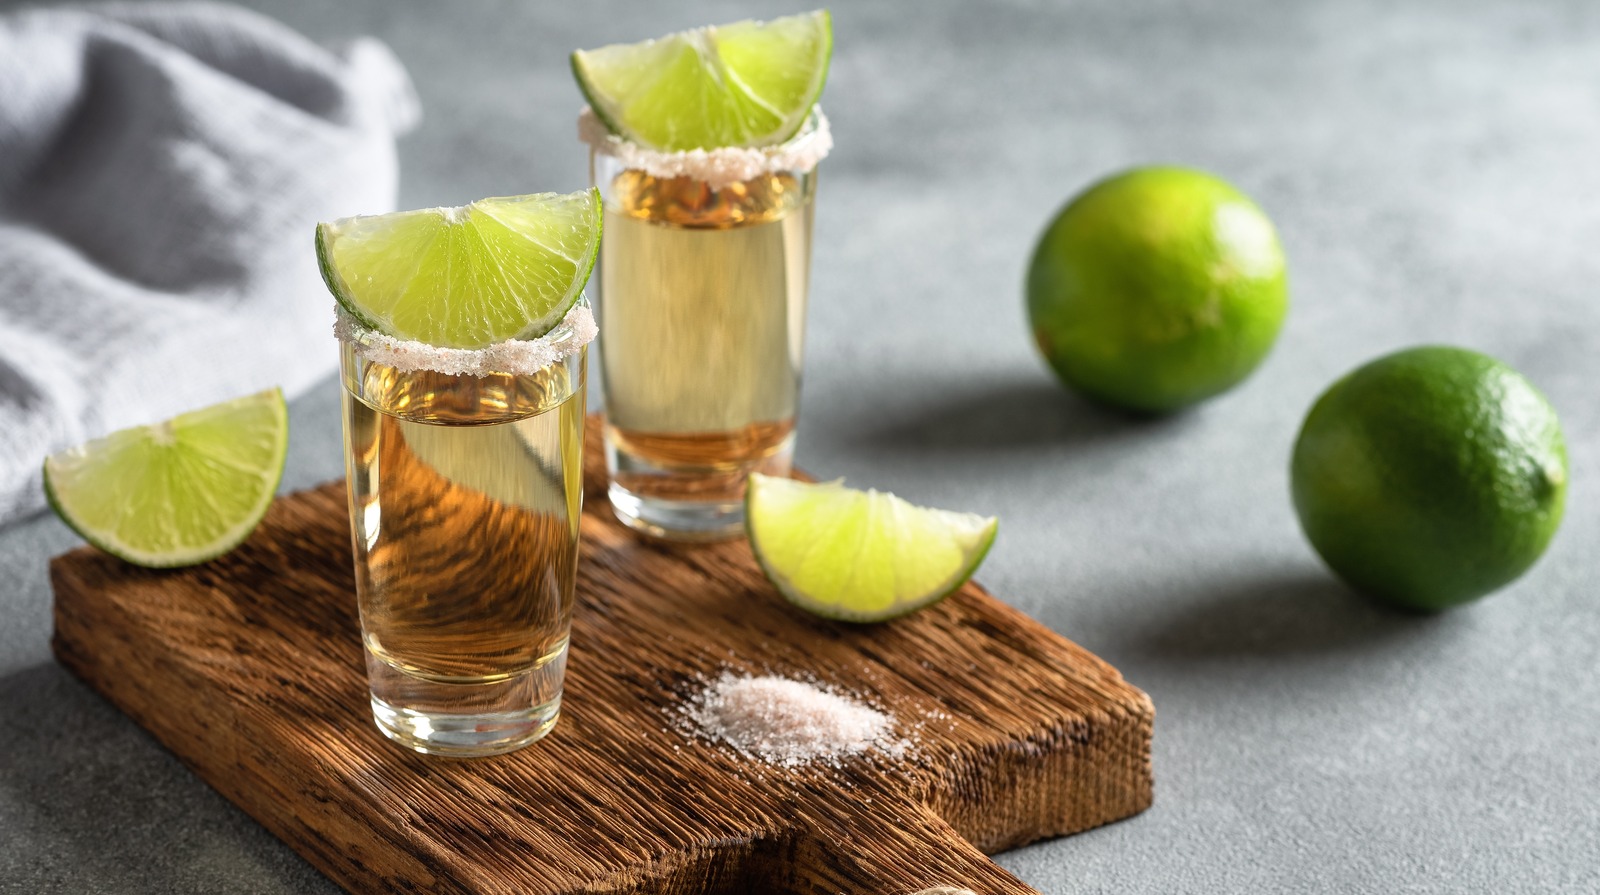 The Right Way To Drink Tequila, According To An Expert